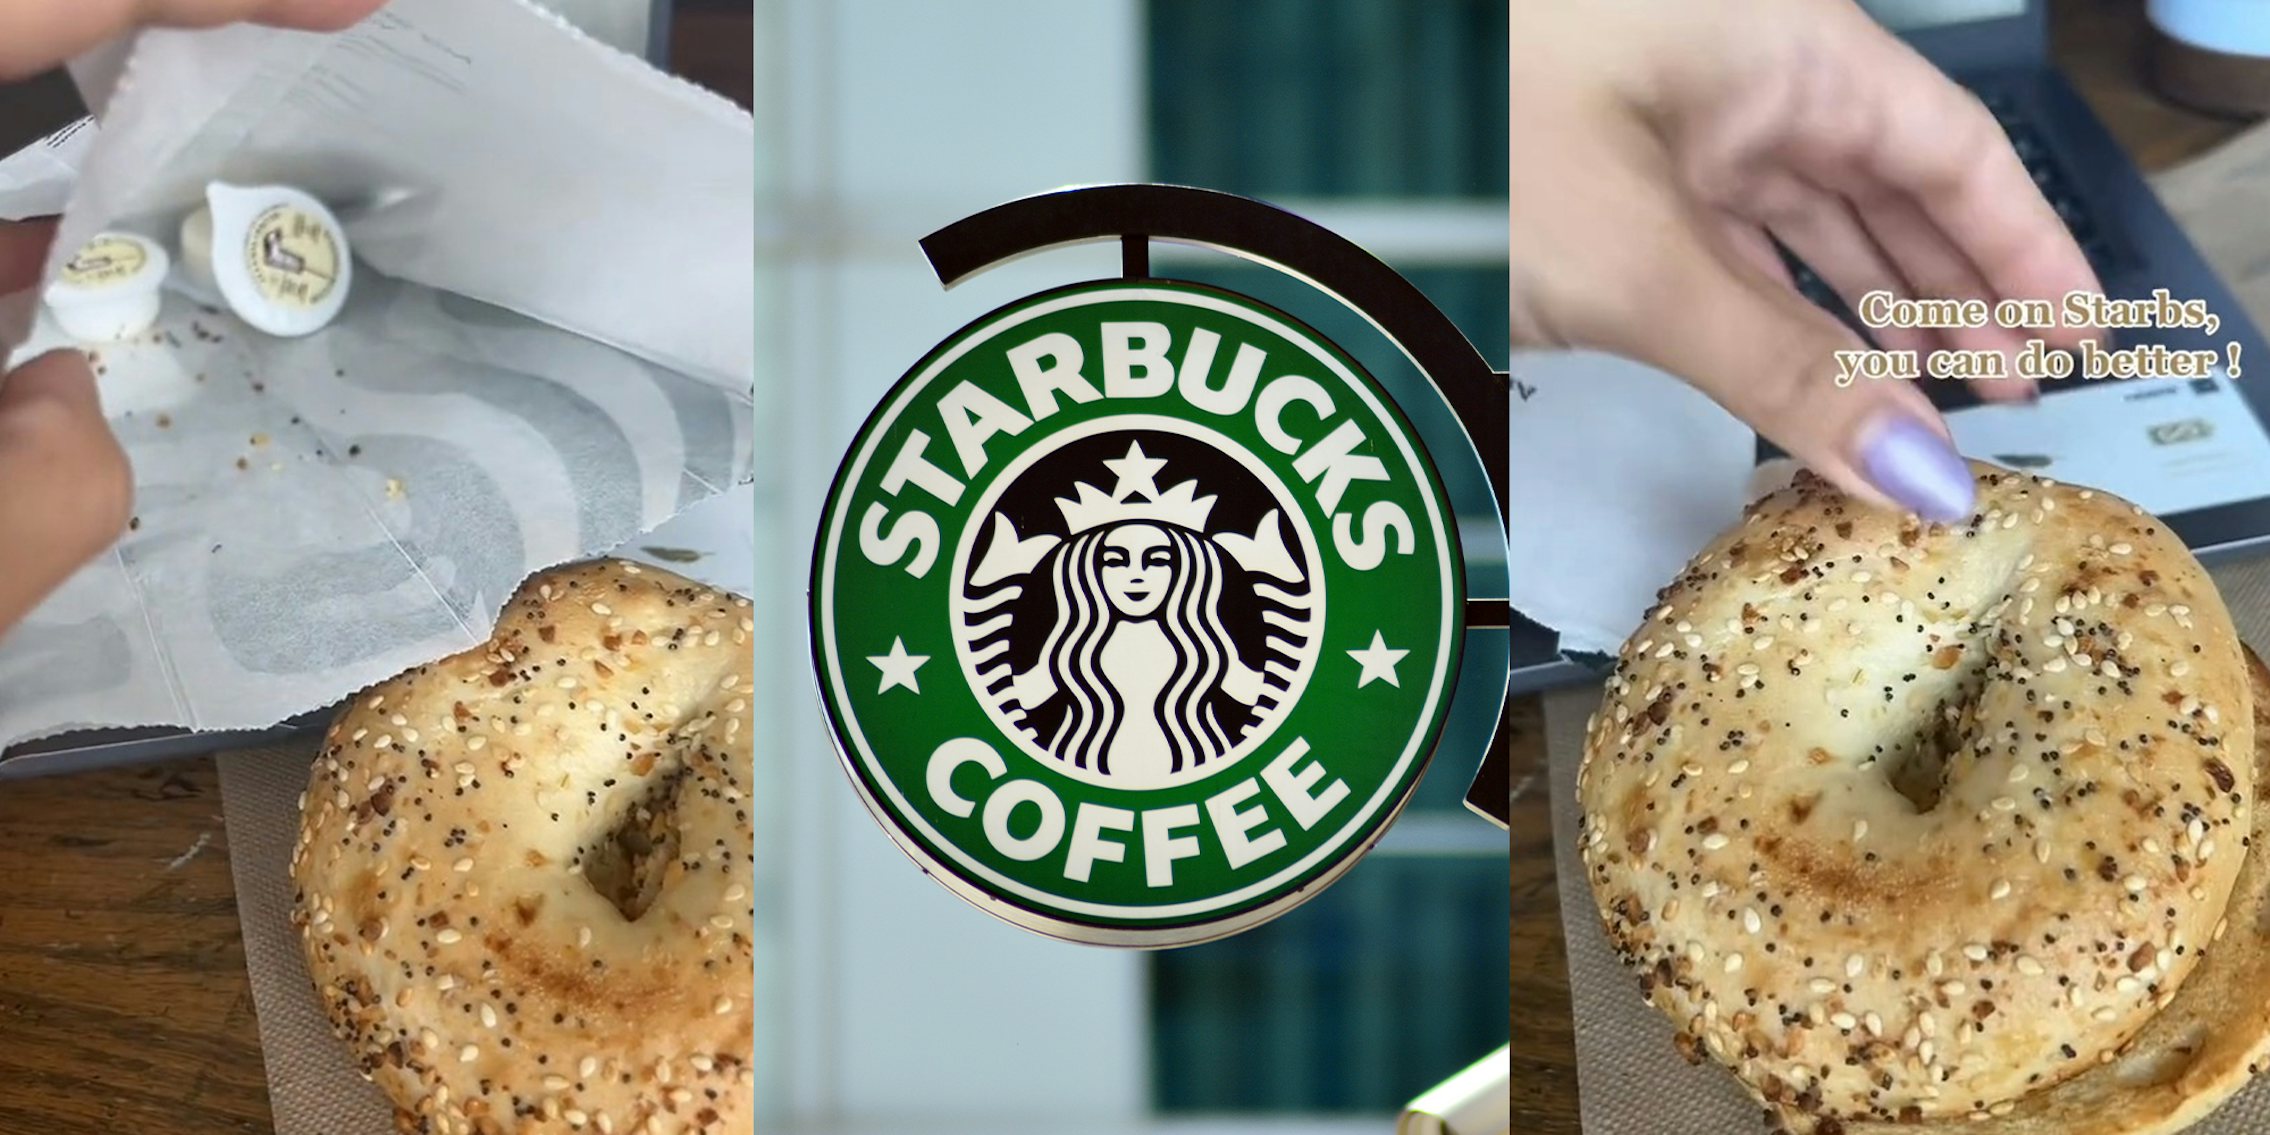 Starbucks customer complains that she has to butter her own bagel